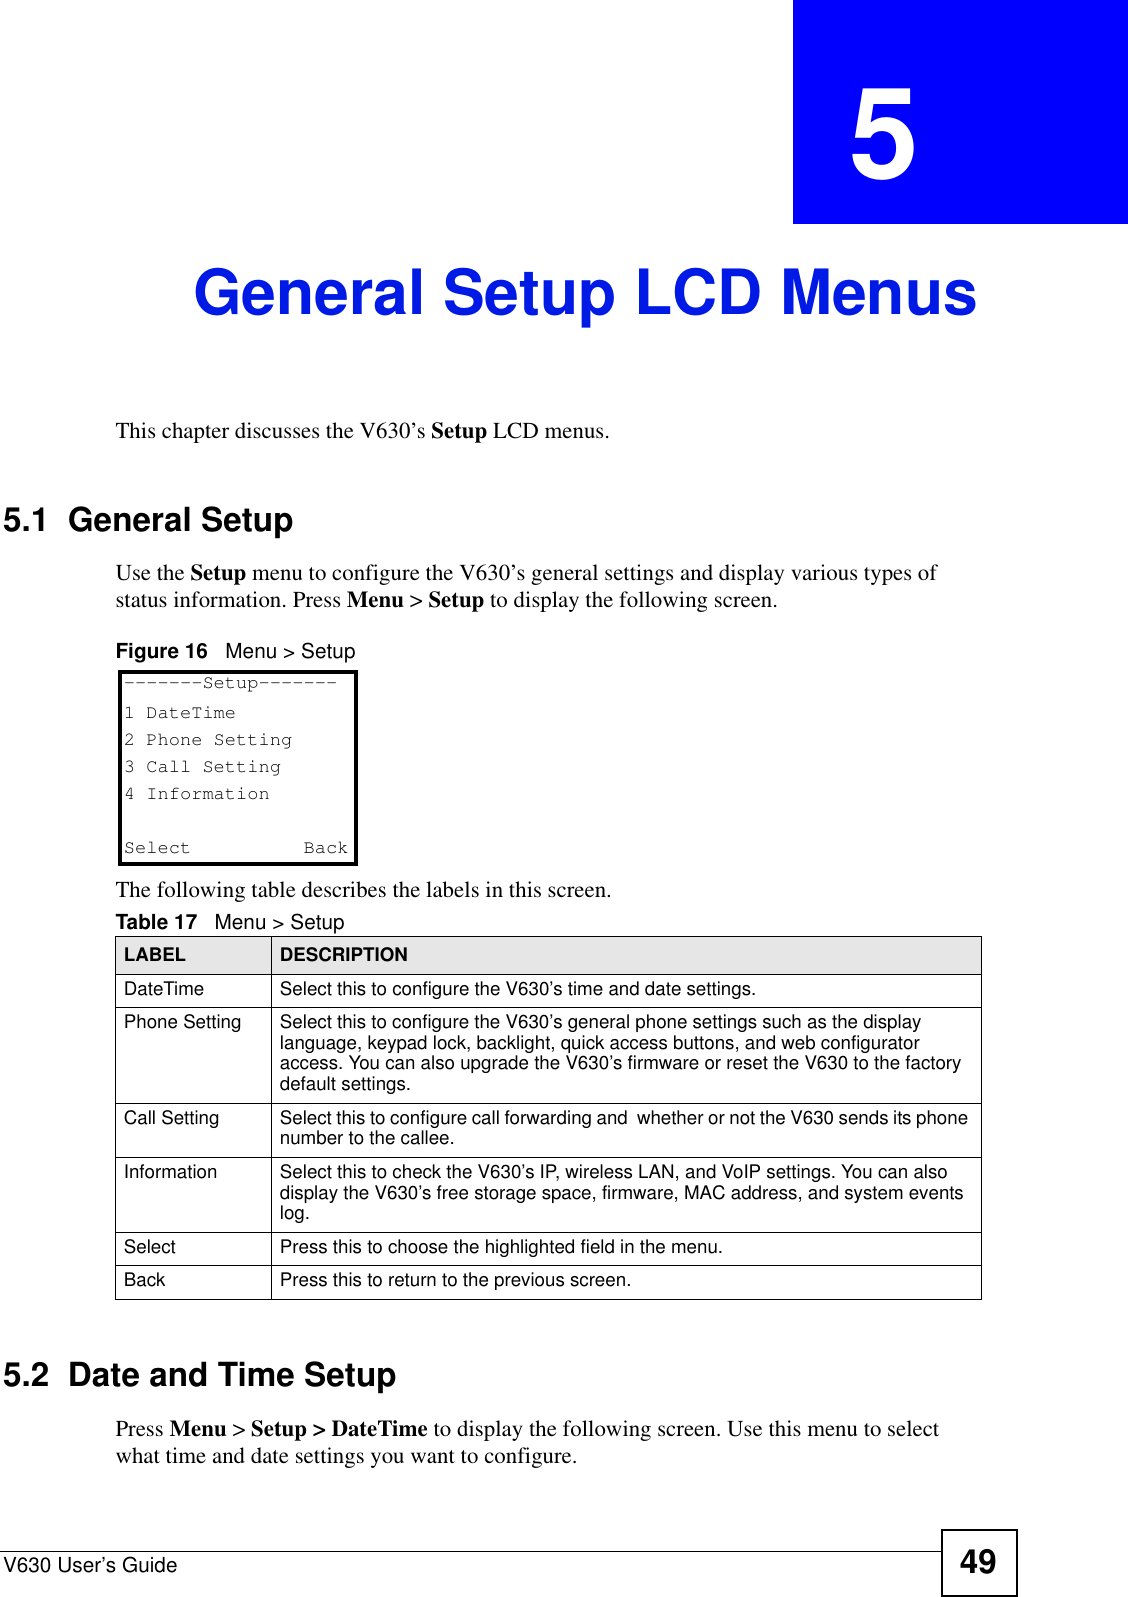 V630 User’s Guide 49CHAPTER  5 General Setup LCD MenusThis chapter discusses the V630’s Setup LCD menus.5.1  General SetupUse the Setup menu to configure the V630’s general settings and display various types of status information. Press Menu &gt; Setup to display the following screen.Figure 16   Menu &gt; SetupThe following table describes the labels in this screen.5.2  Date and Time SetupPress Menu &gt; Setup &gt; DateTime to display the following screen. Use this menu to select what time and date settings you want to configure.Table 17   Menu &gt; SetupLABEL DESCRIPTIONDateTime Select this to configure the V630’s time and date settings.Phone Setting Select this to configure the V630’s general phone settings such as the display language, keypad lock, backlight, quick access buttons, and web configurator access. You can also upgrade the V630’s firmware or reset the V630 to the factory default settings. Call Setting Select this to configure call forwarding and  whether or not the V630 sends its phone number to the callee.Information Select this to check the V630’s IP, wireless LAN, and VoIP settings. You can also display the V630’s free storage space, firmware, MAC address, and system events log.Select Press this to choose the highlighted field in the menu.Back Press this to return to the previous screen.-------Setup-------1 DateTime2 Phone Setting3 Call Setting4 InformationSelect   Back